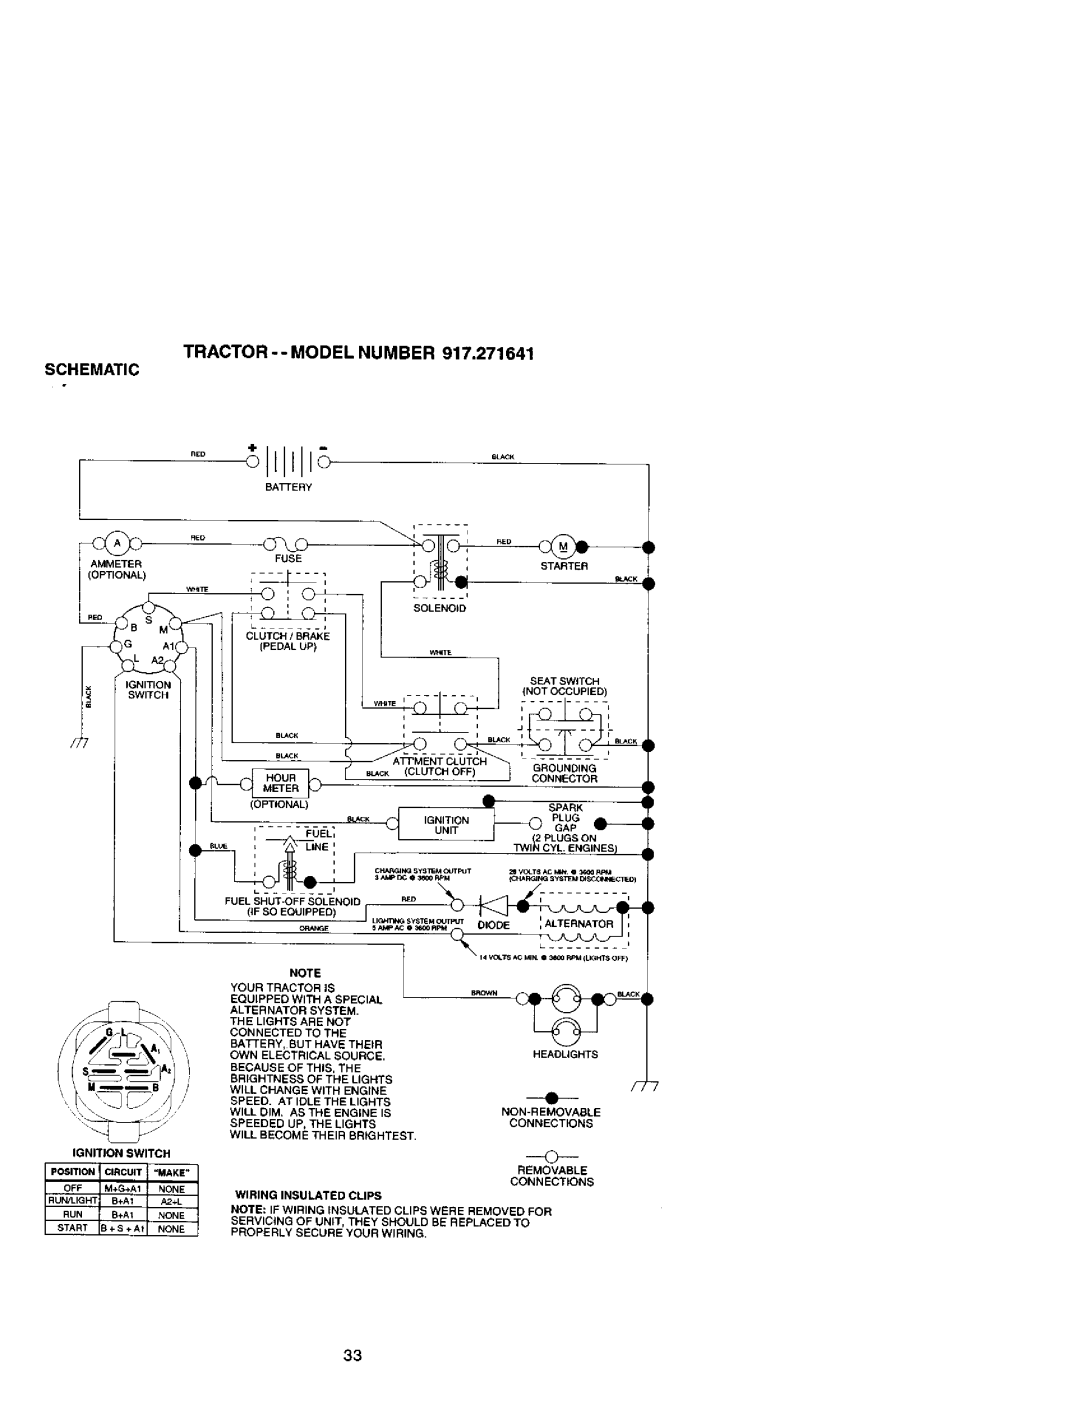 Craftsman 917.271641 owner manual Cwtoh,Ora,E, PEOALfPfI, Tractor -- Model Number, GL At, Ignition 